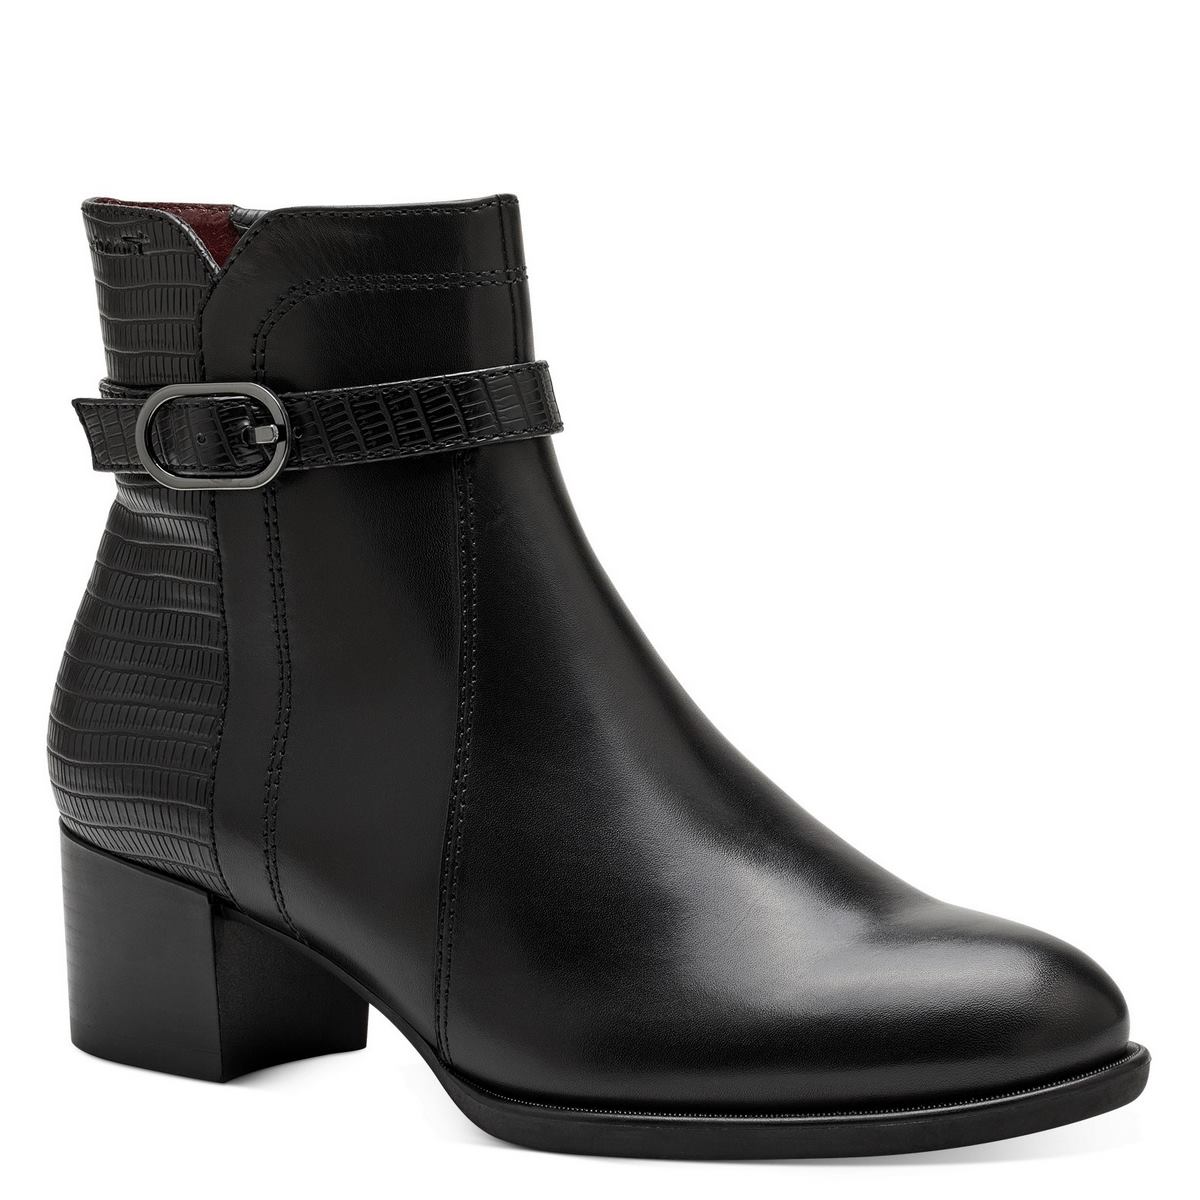 LEATHER ANKLE BOOTS 1-25041-41 001 TAMARIS BLACK